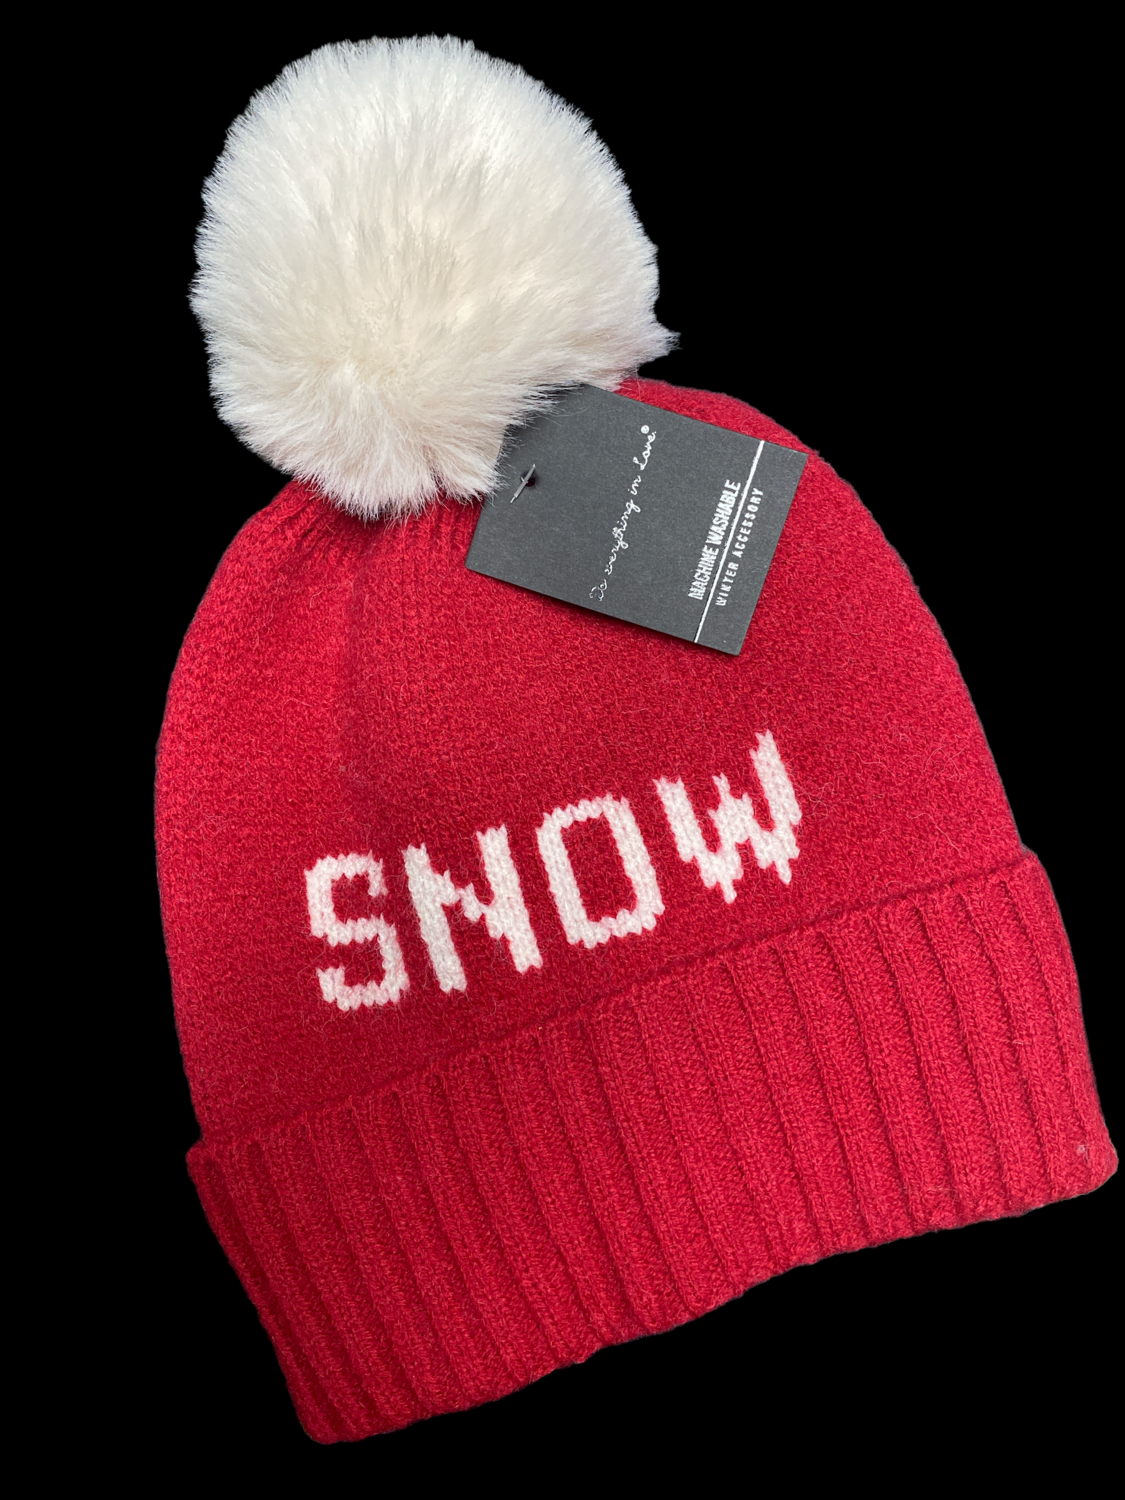 New "Do Everything In Love" Snow Pom Beanie Hat One Size